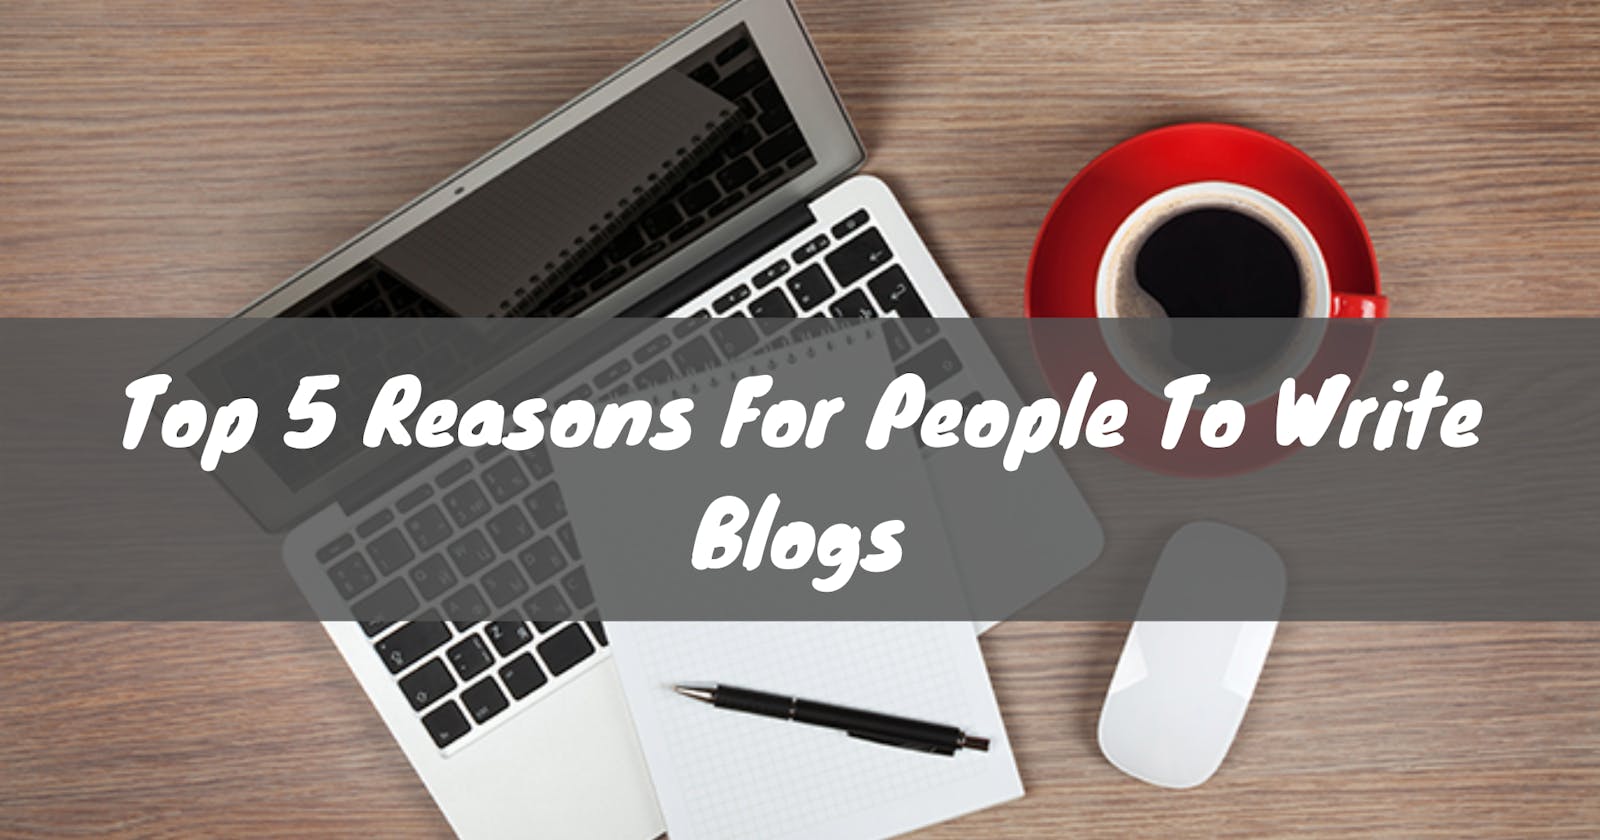 Top 5 reasons for people to write blogs, And Why I started to blog?